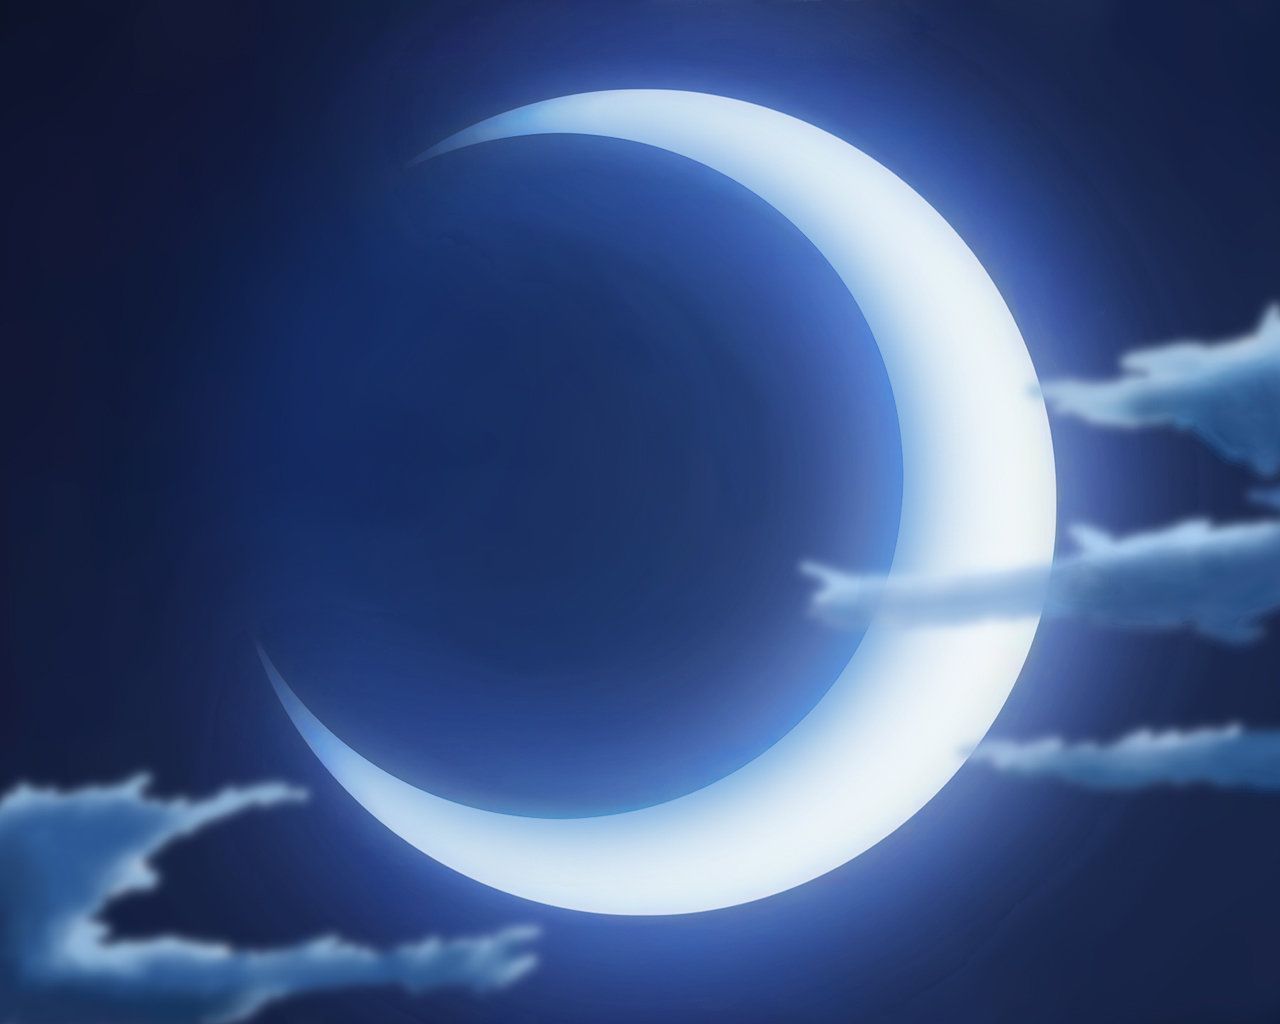 Crescent Moon Wallpaper. Awesome Moon Wallpaper, Pretty Moon Wallpaper and Moon Wallpaper